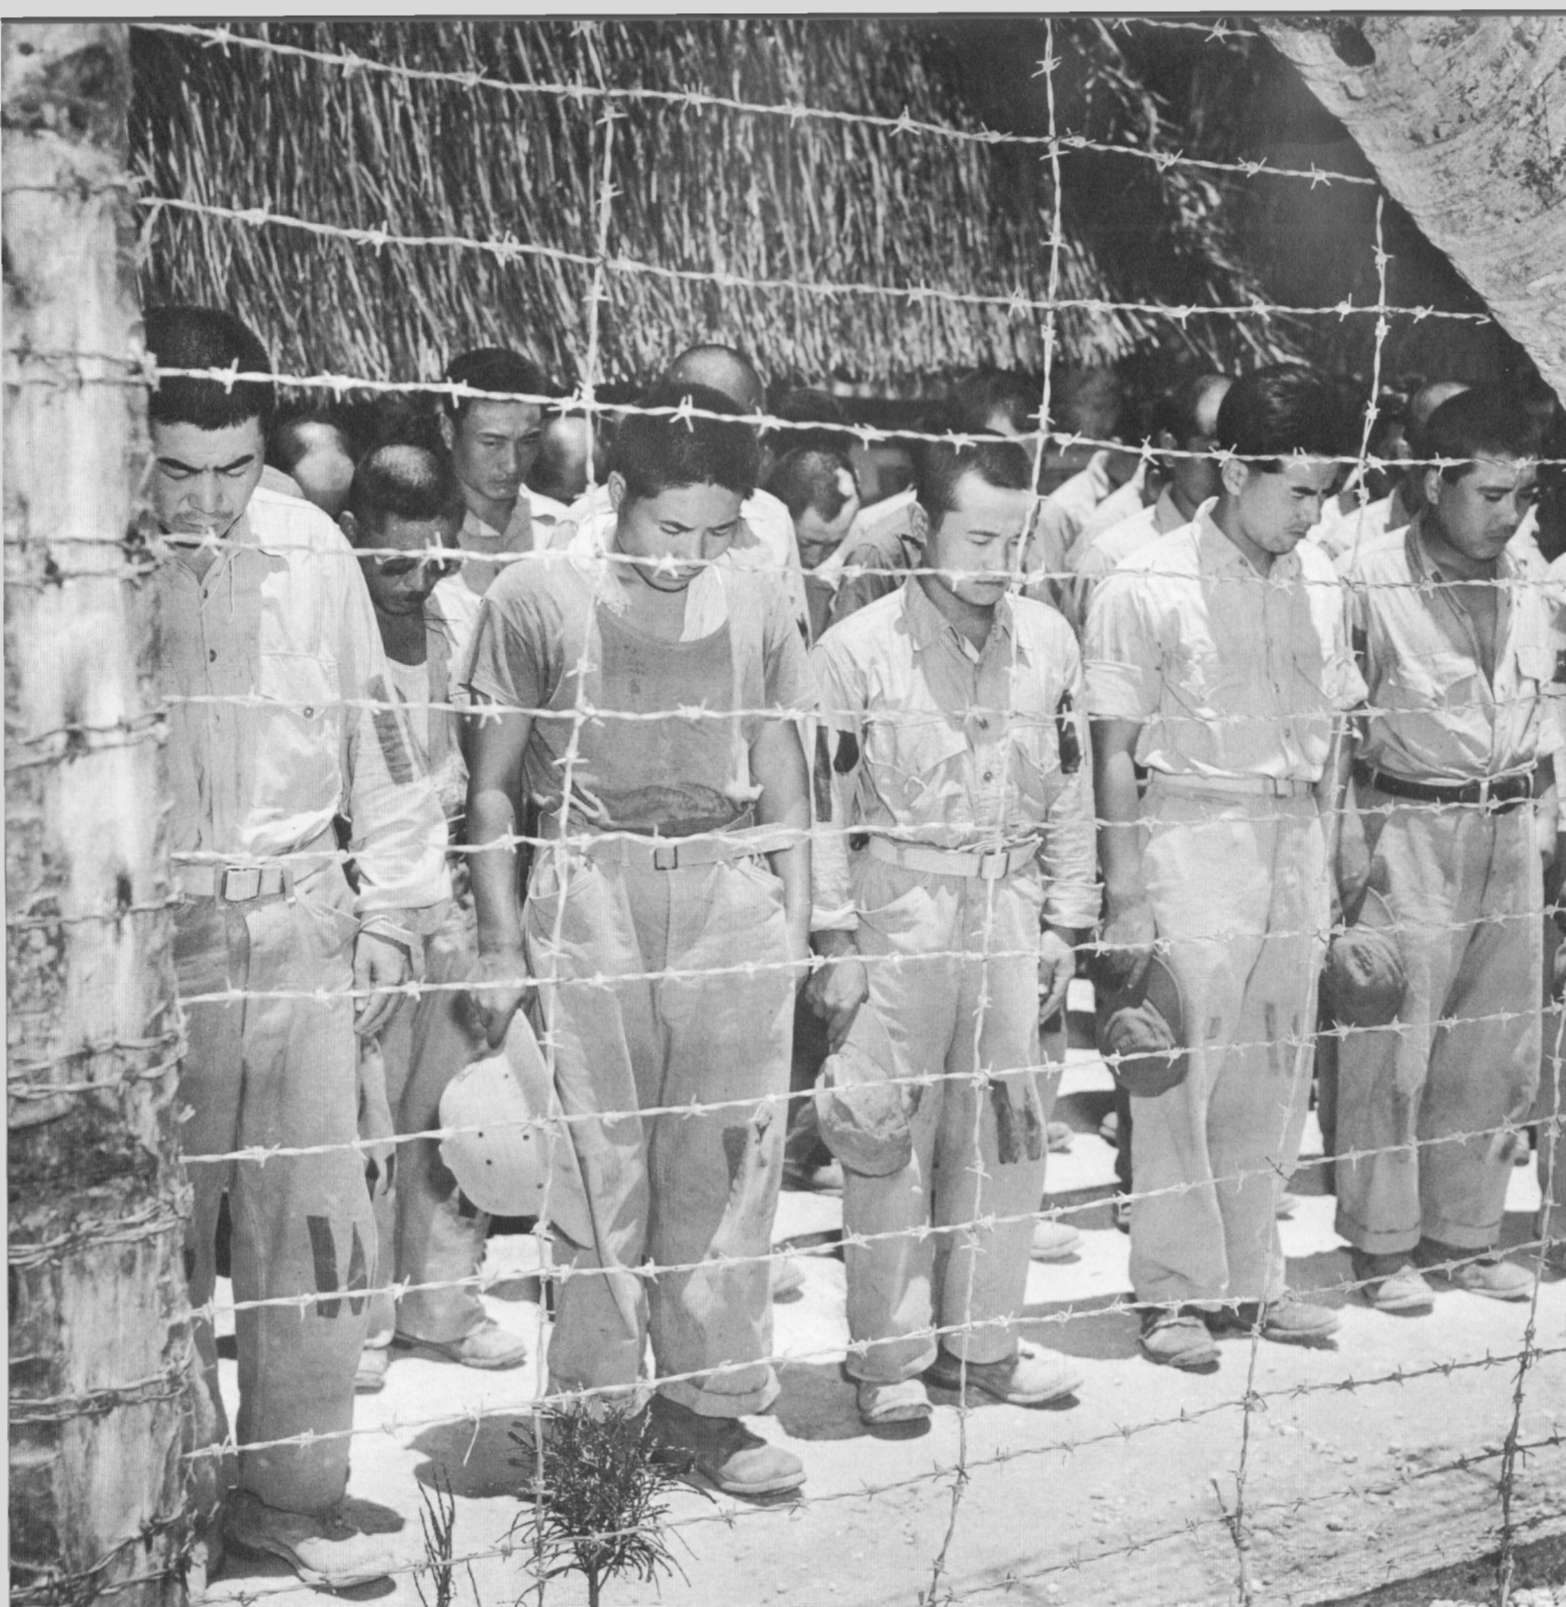 Japanese prisoners of war at a POW camp with bowed heads as they heard Emperor Hirohito broadcast the unconditional surrender of Japan.